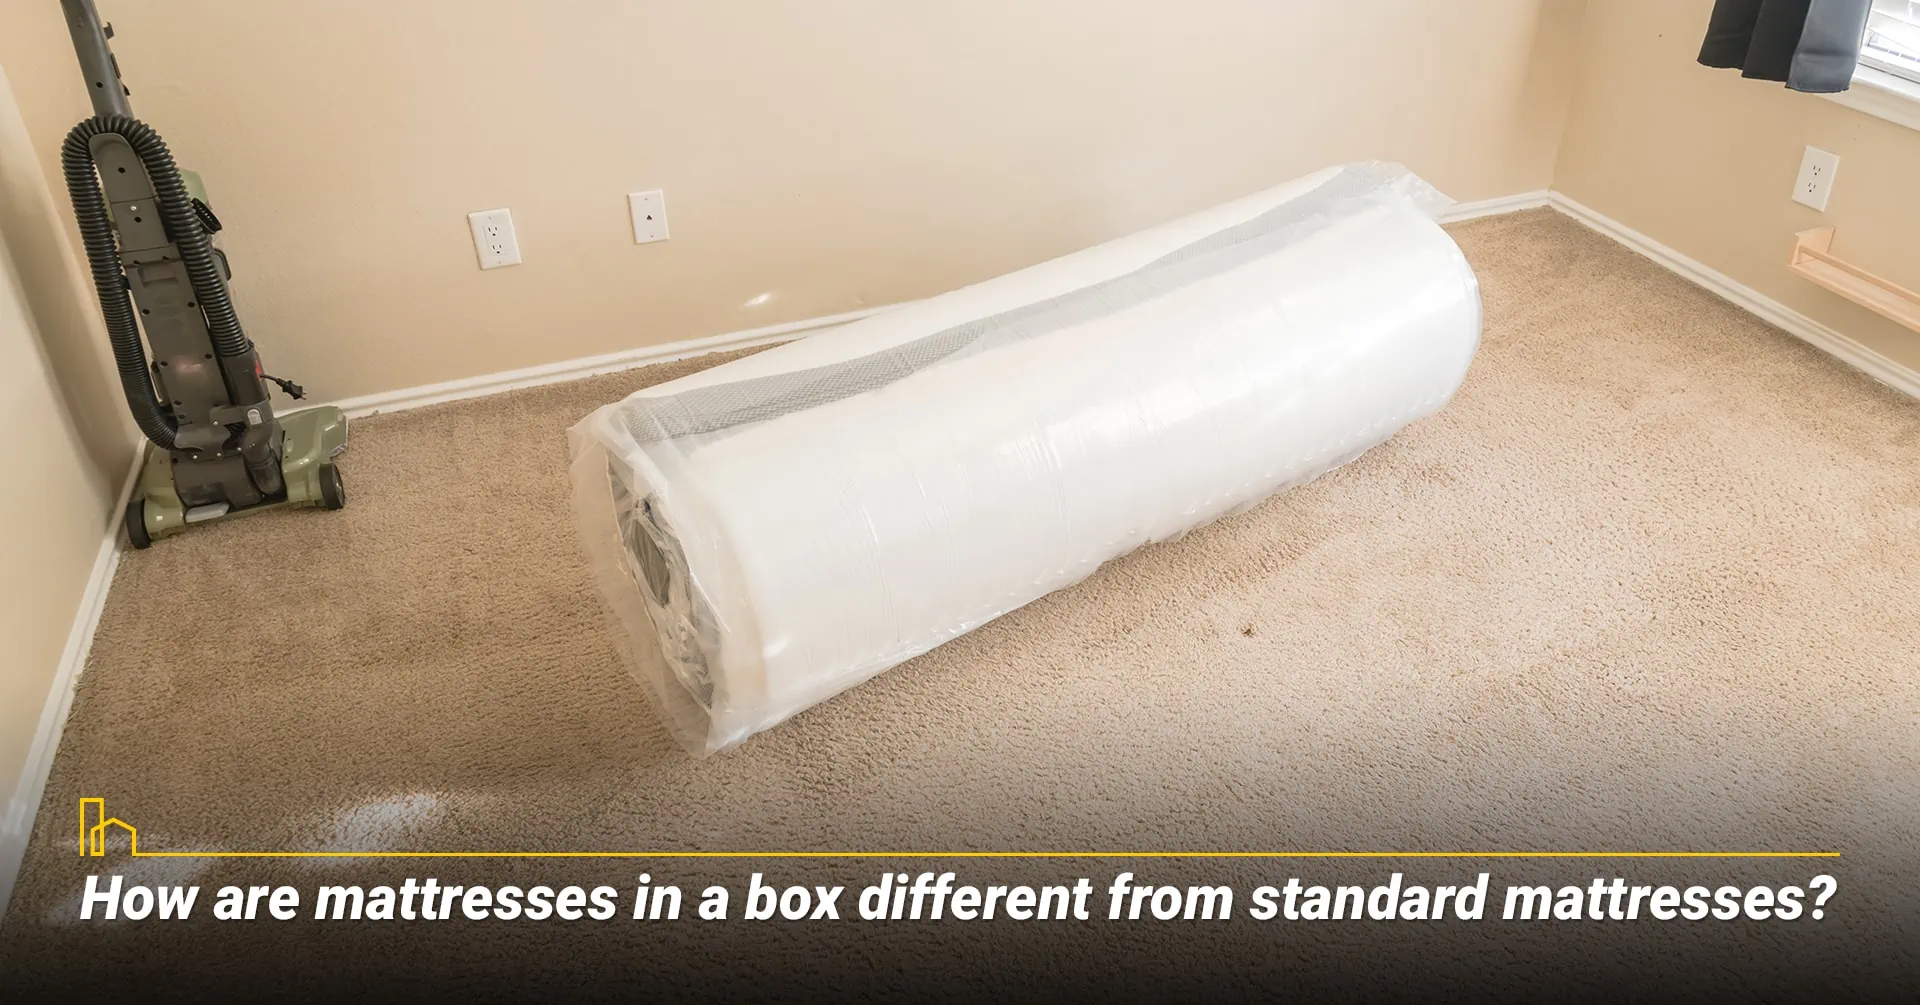 How are mattresses in a box different from standard mattresses?